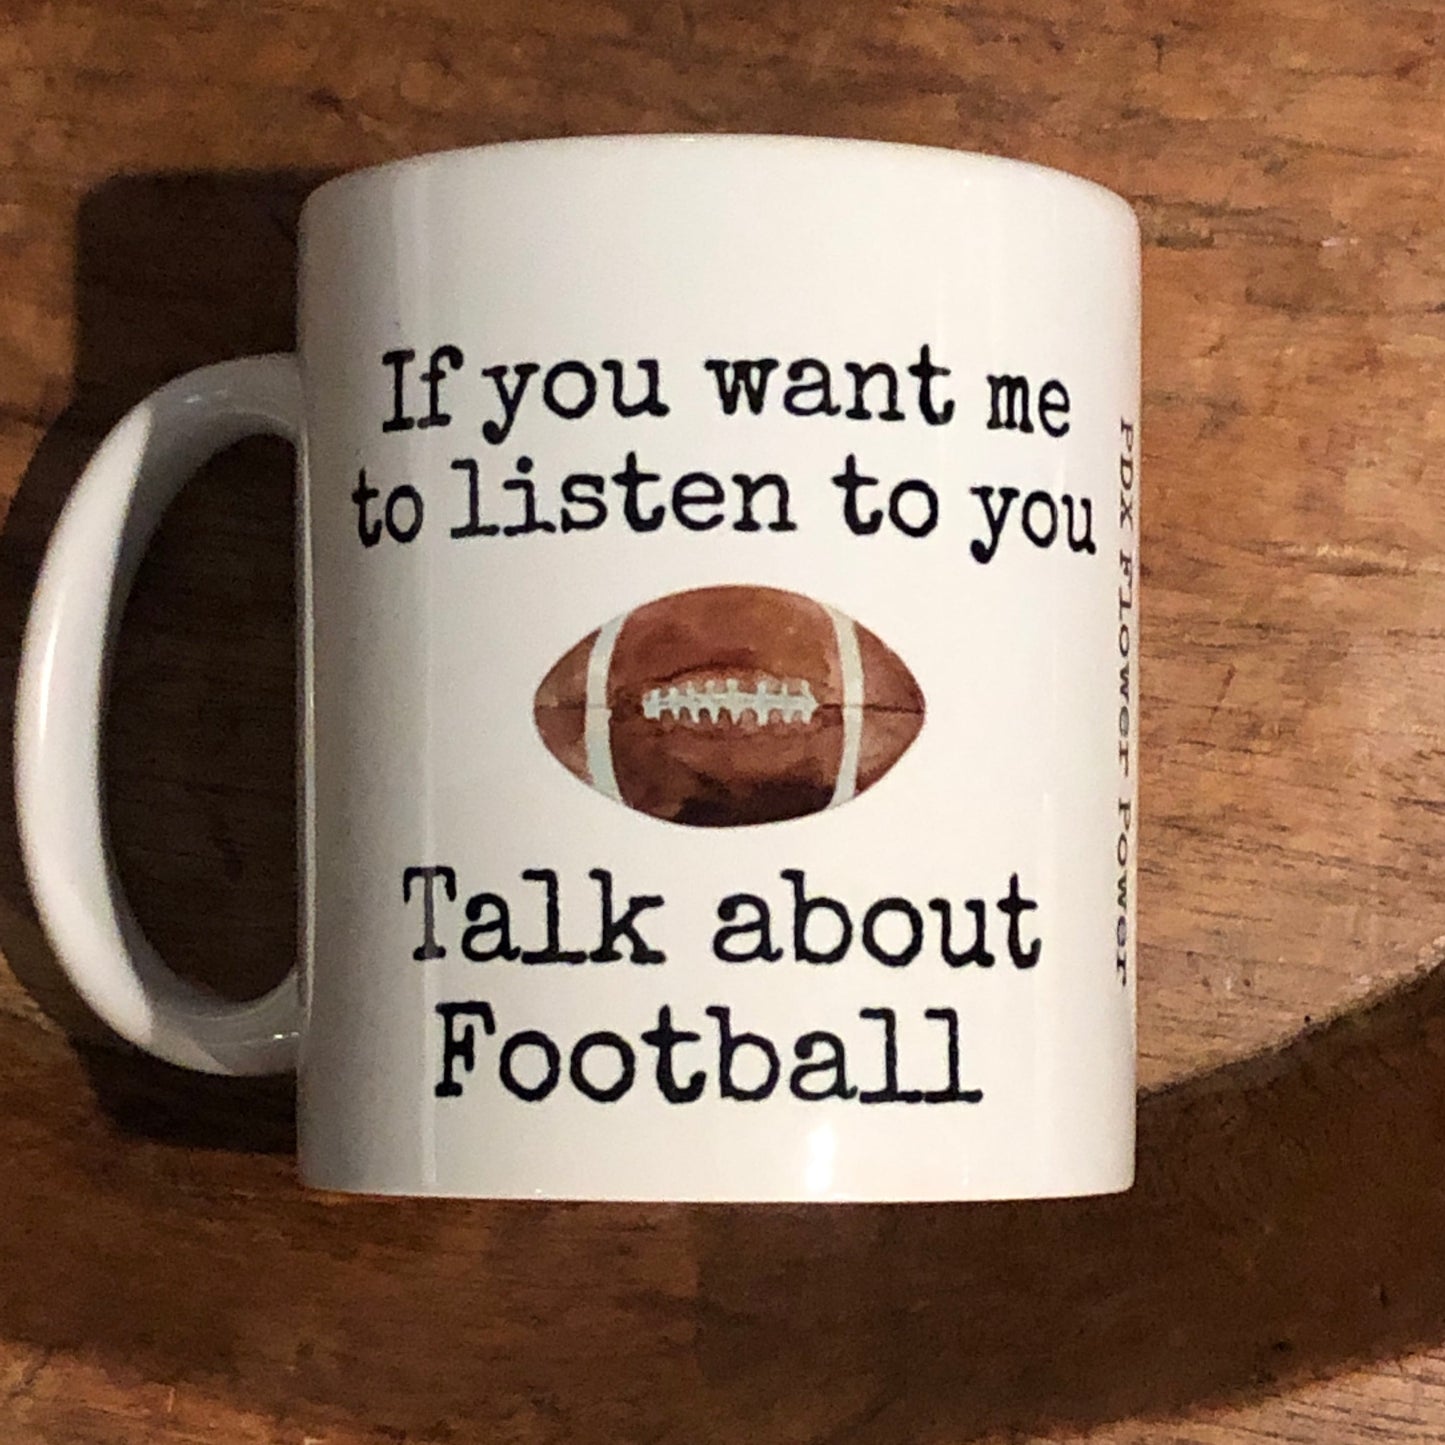 PDX Flower Power  "If you want me to listen talk about football" mug